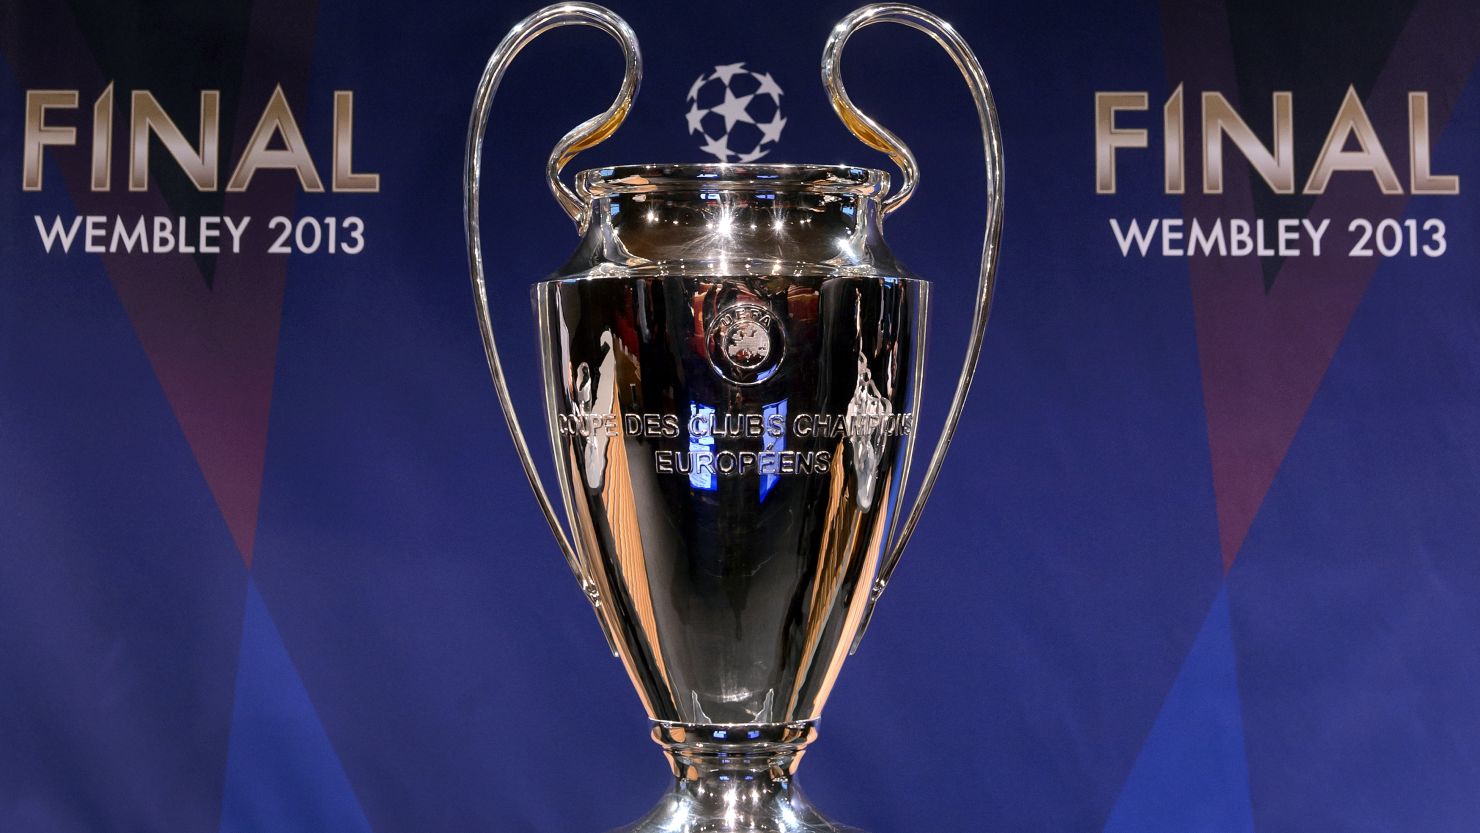 Financial Fair Play rules give UEFA sweeping powers, including excluding clubs from the Champions League.